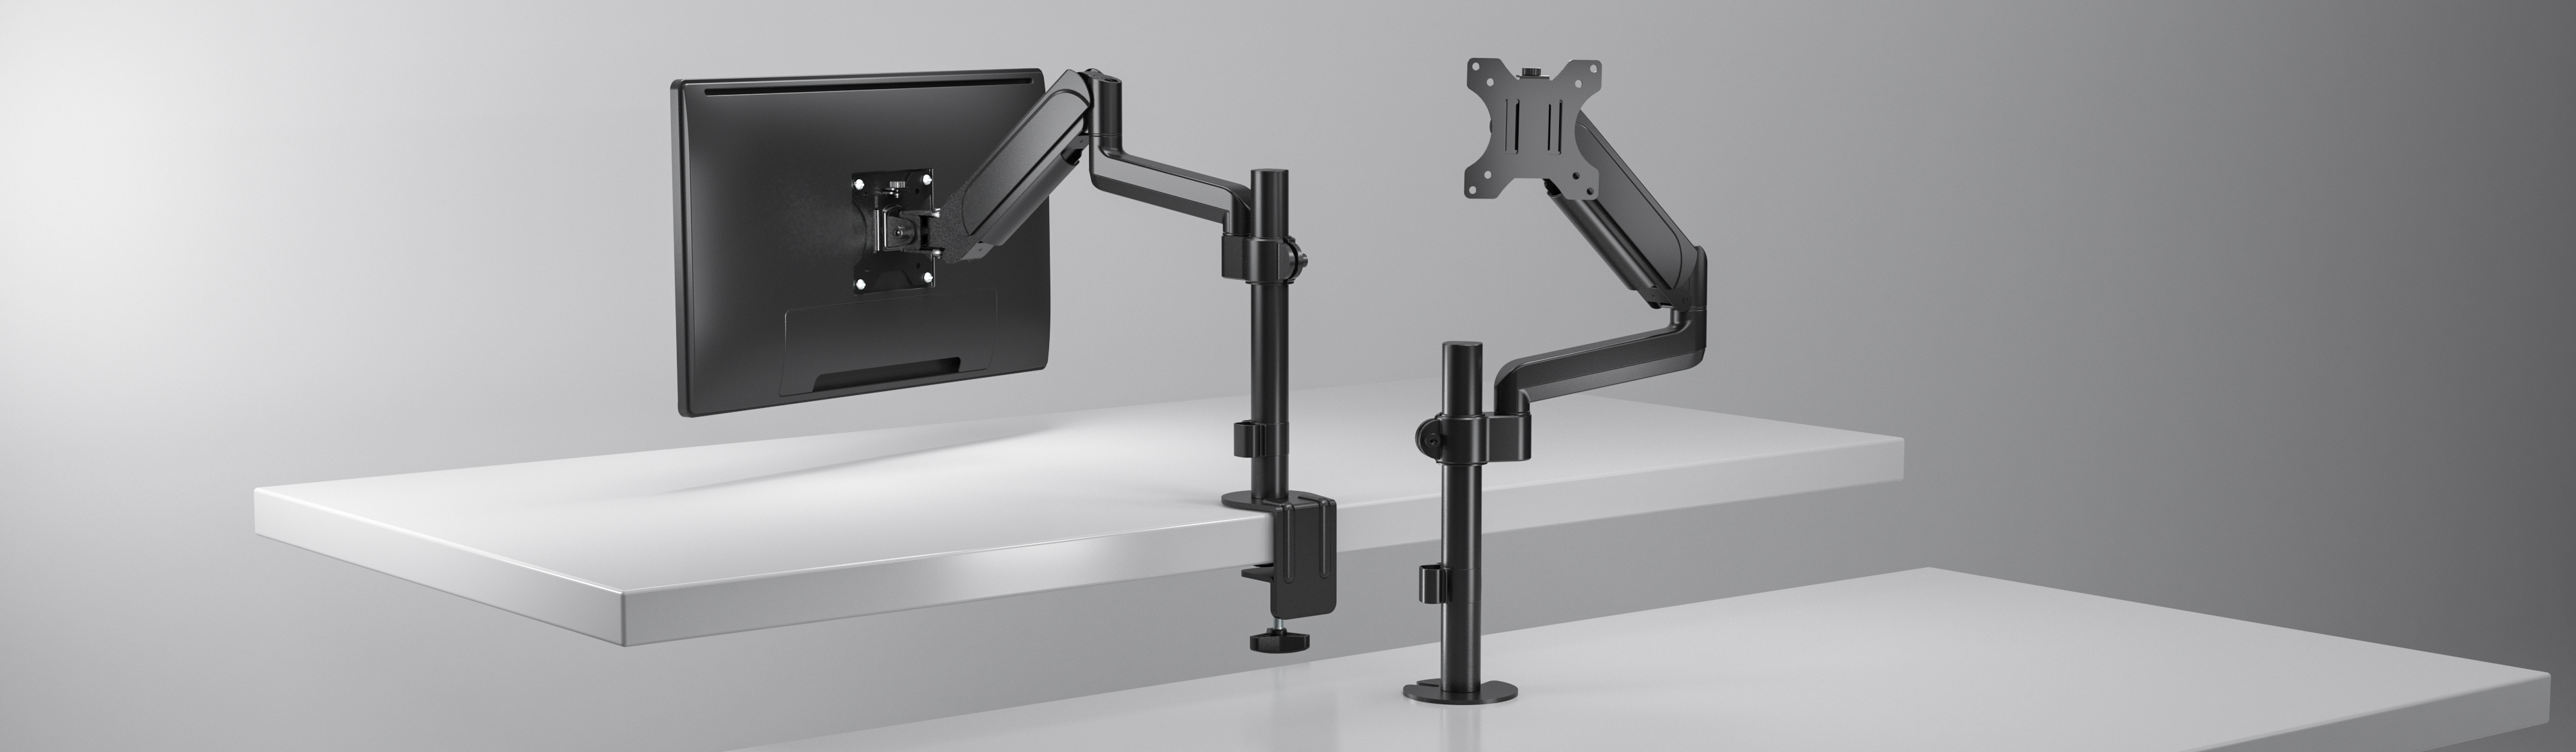 Pole-Mounted Spring-Assisted Monitor Arms  LDT48E Series